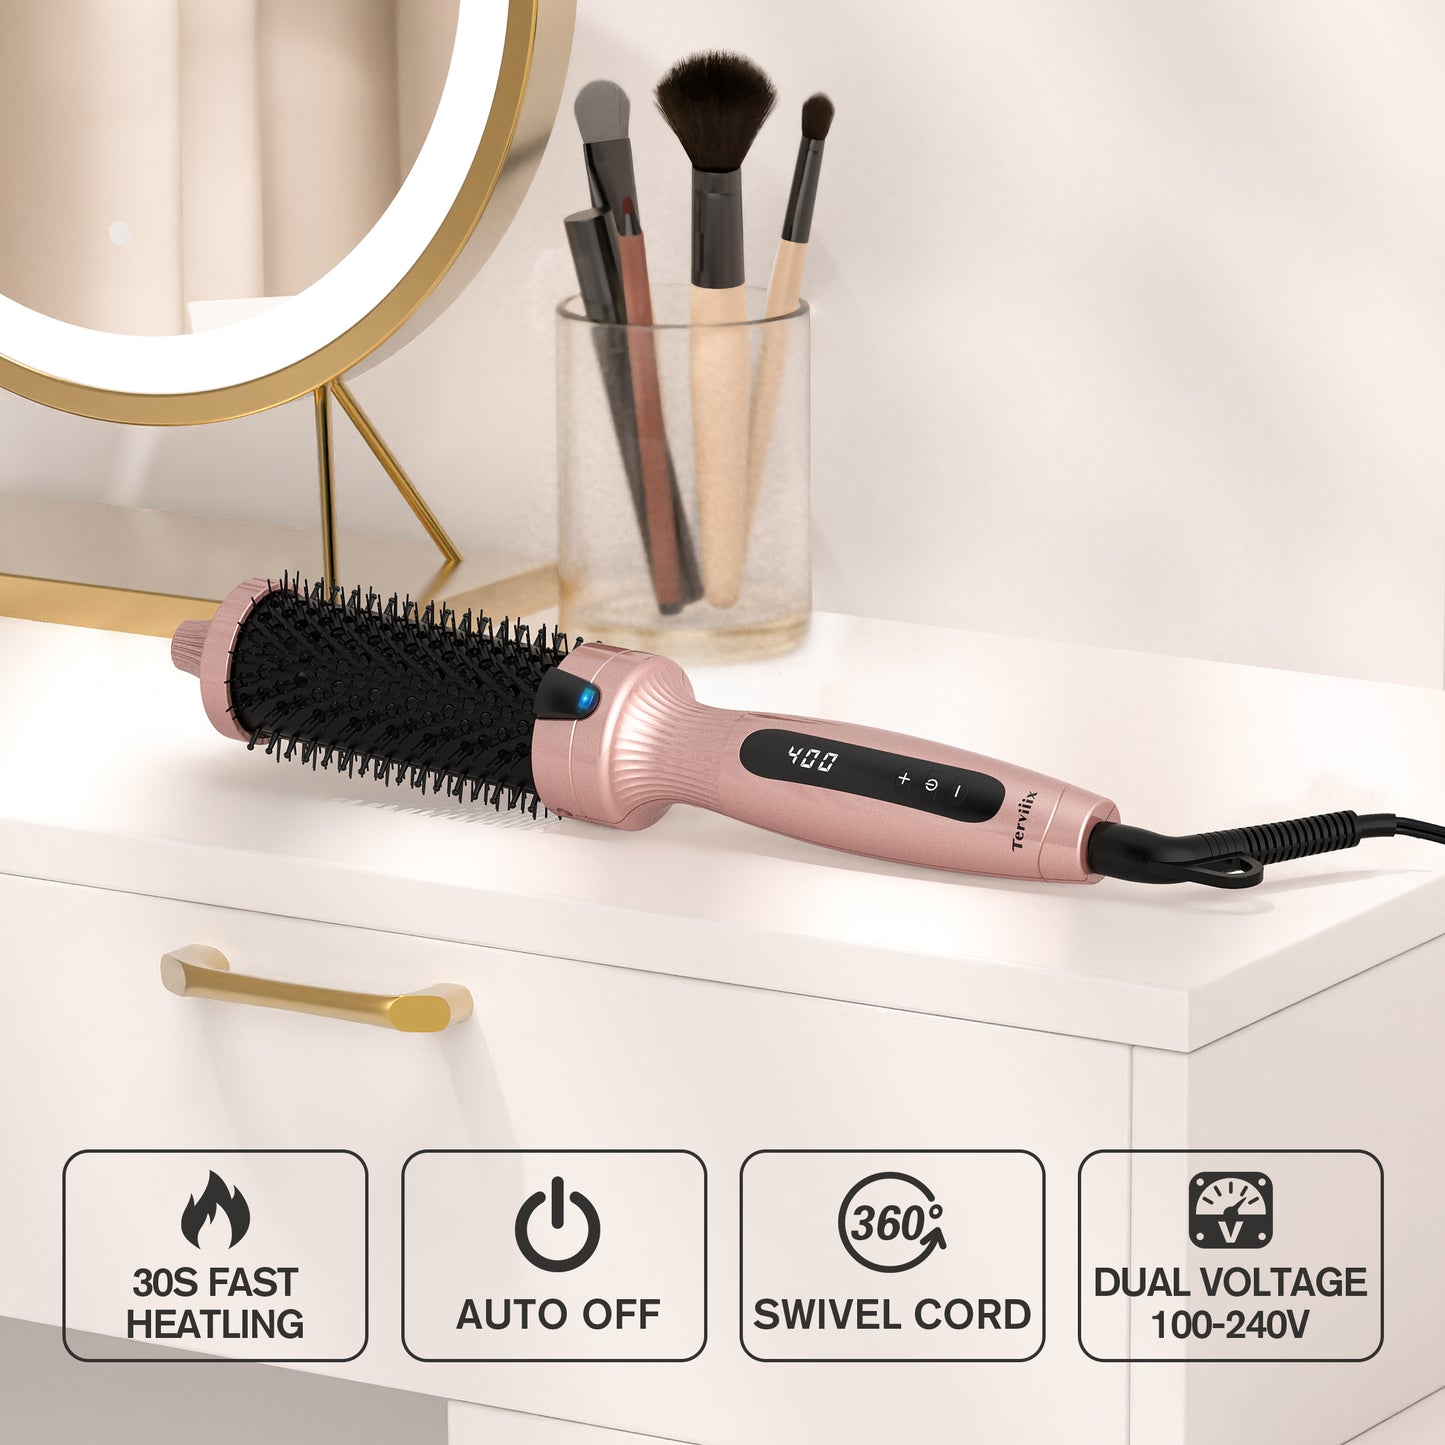 Terviiix 1.5" Thermal Ionic Brush Heated for Hair Curling, Gold